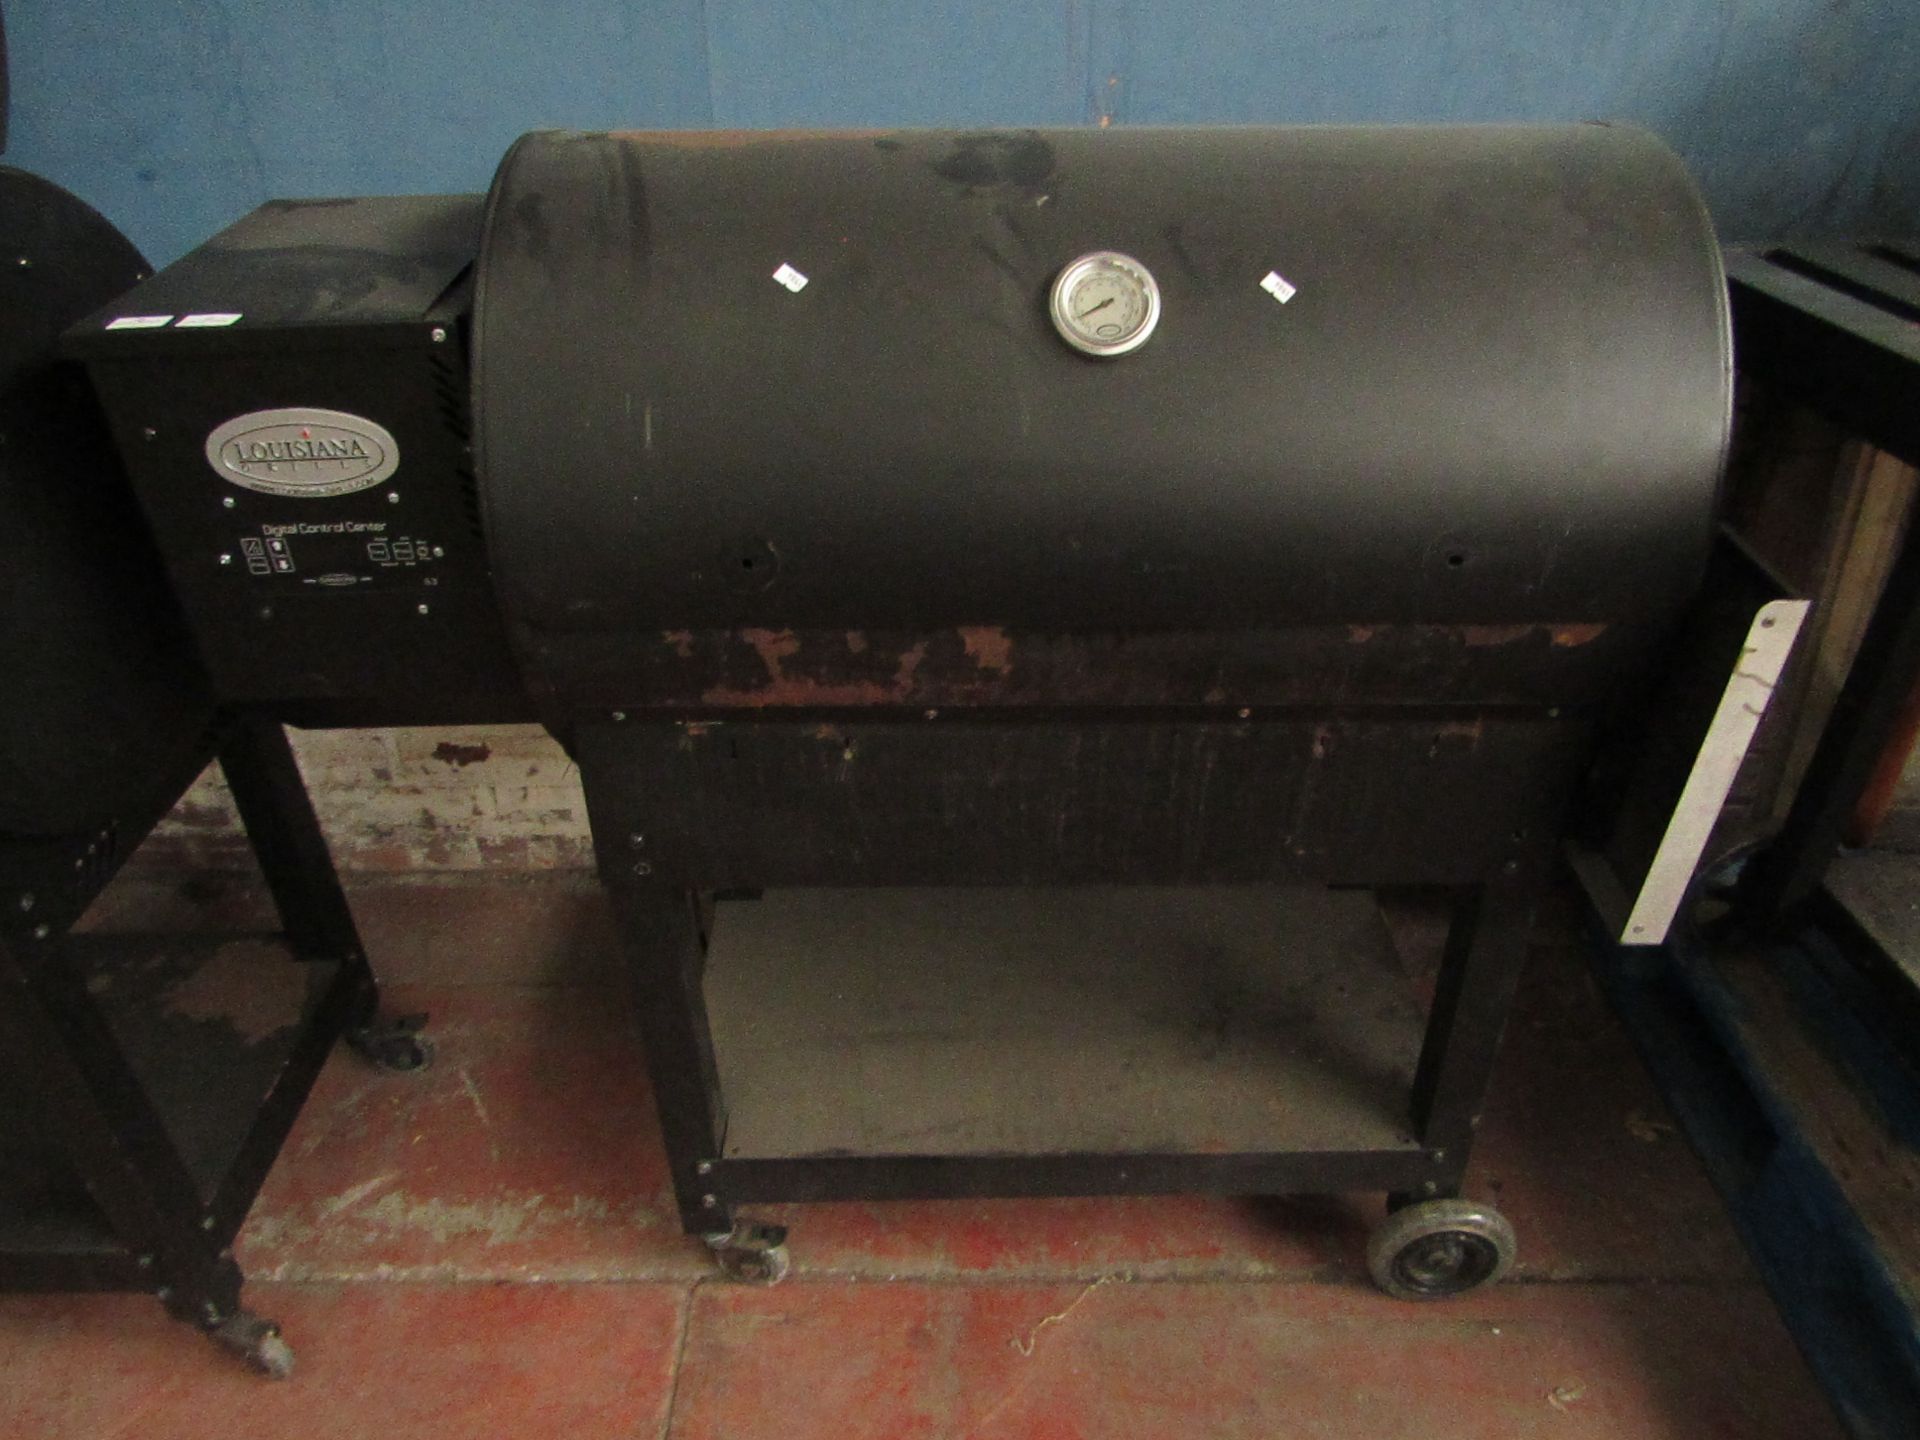 LOUISANA GRILLS WOODFIRE BBQS | IN USED CONDITION, VIEWING IS RECOMMENDED | RRP £699.99 EACH |